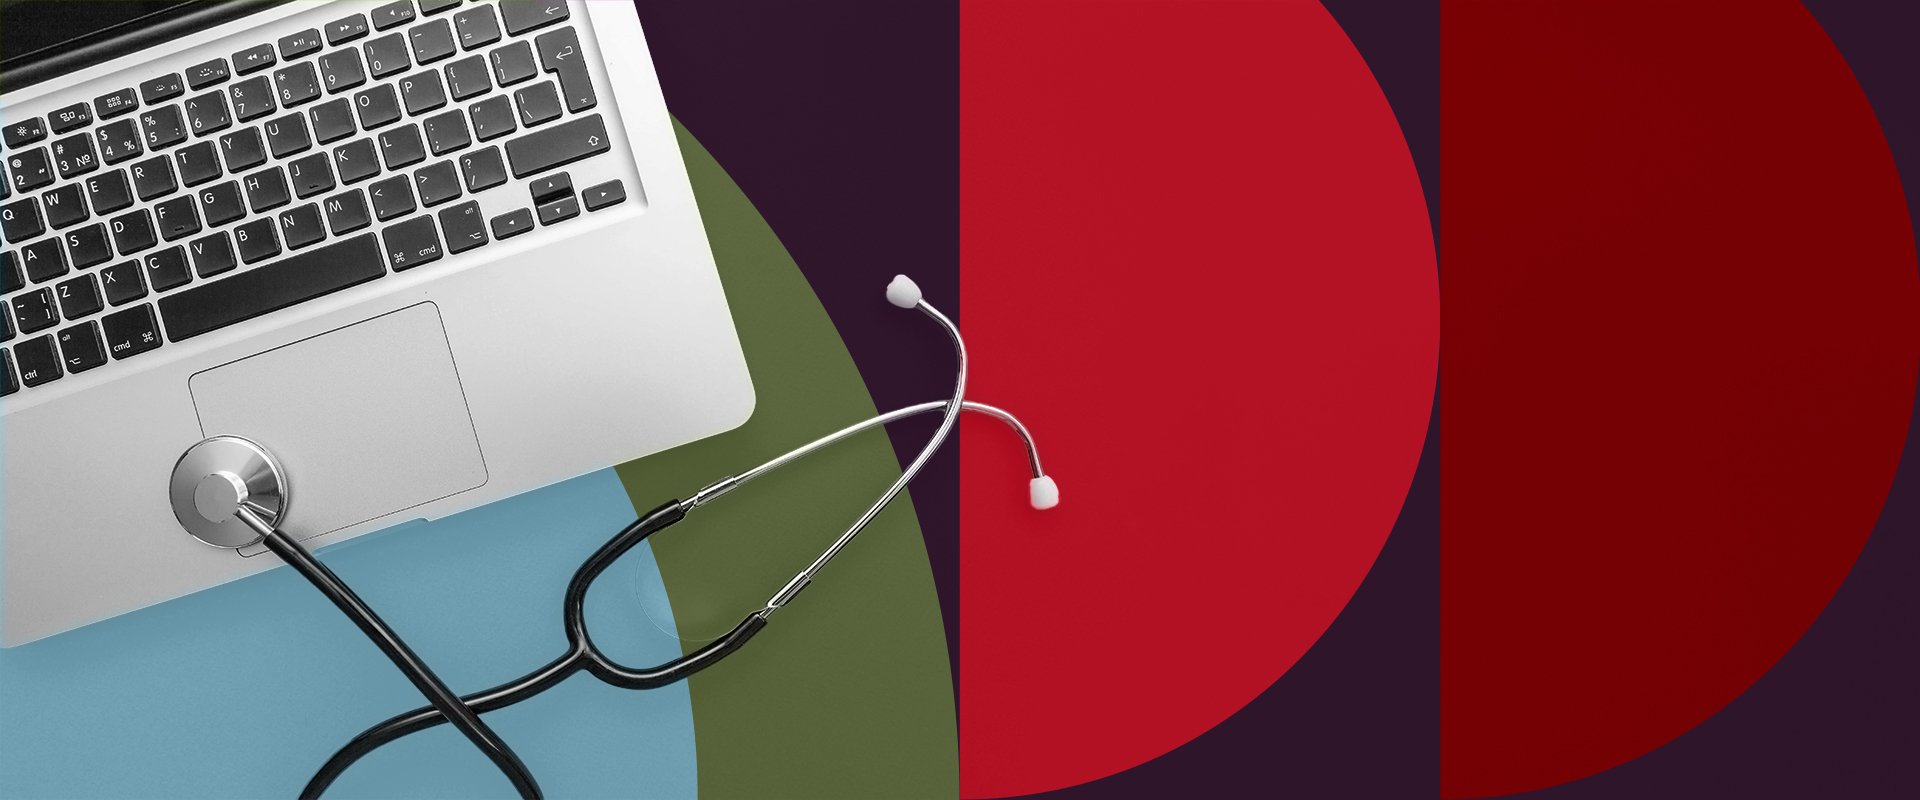 Mac laptop with stethoscope, red and purple Estipona Group graphic background